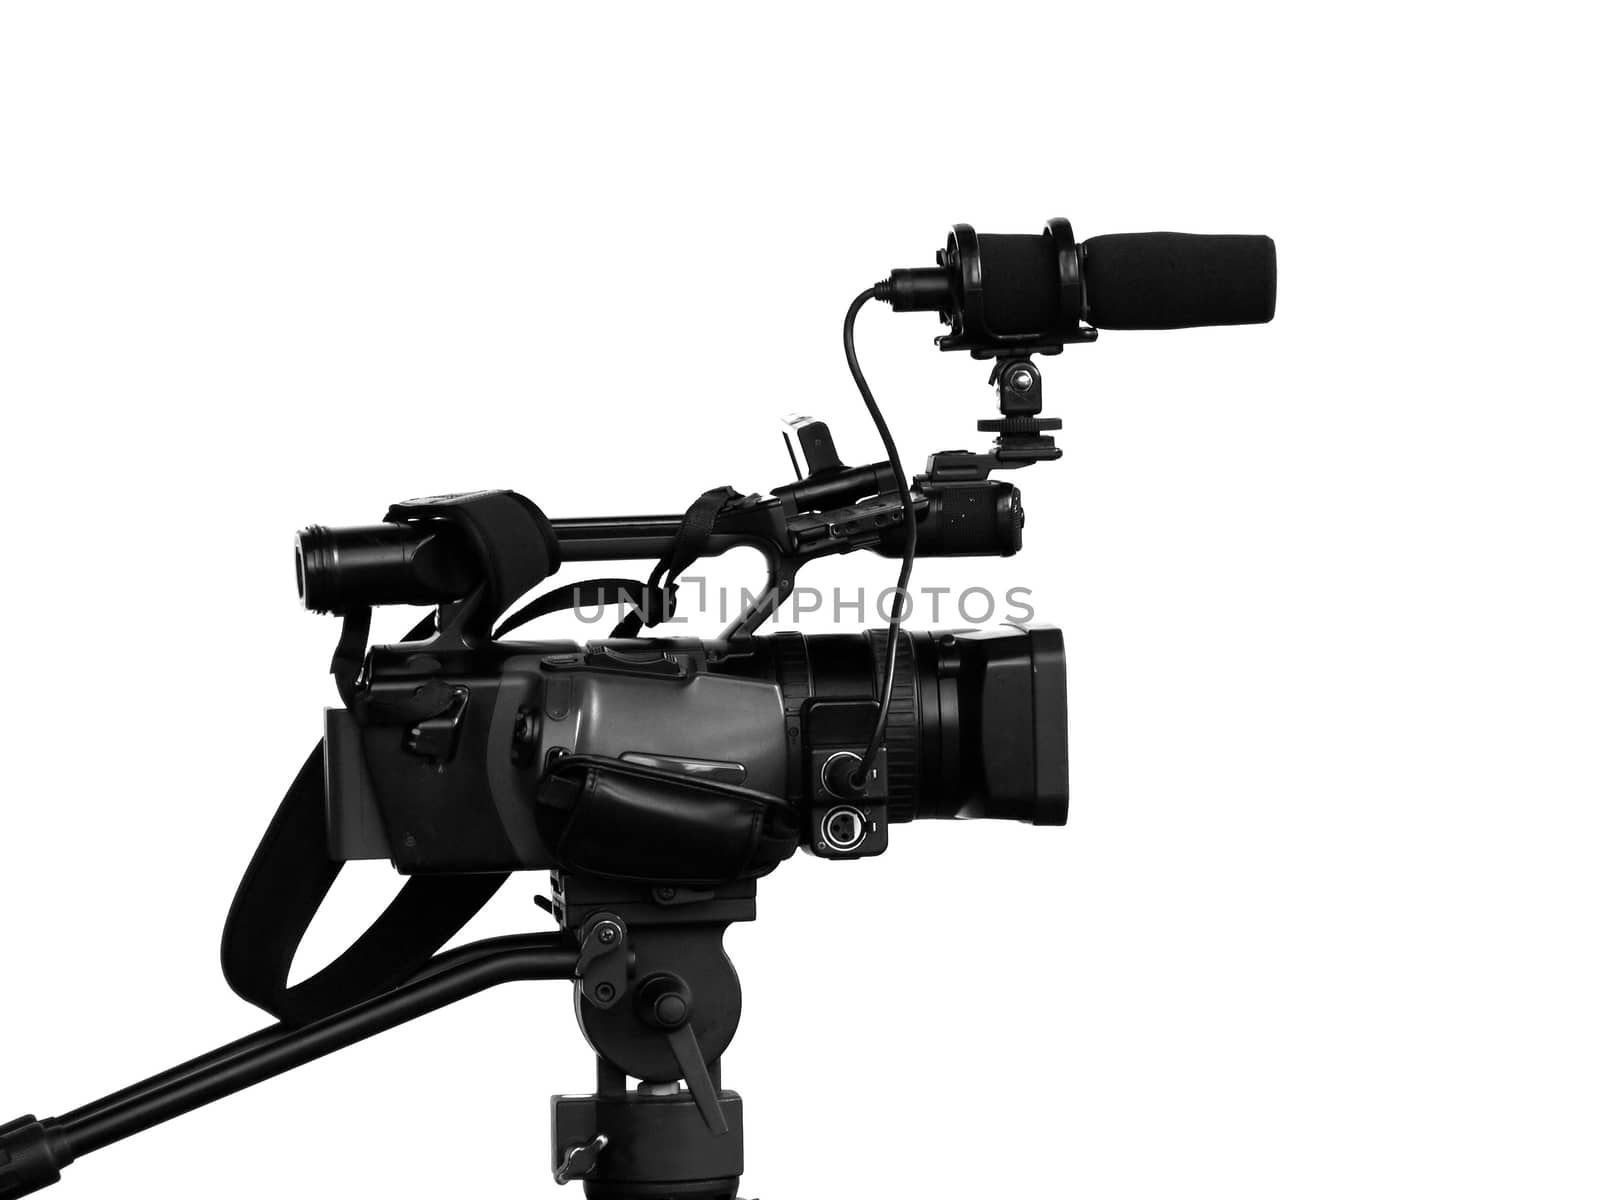 A digital movie camera with attached microphone
